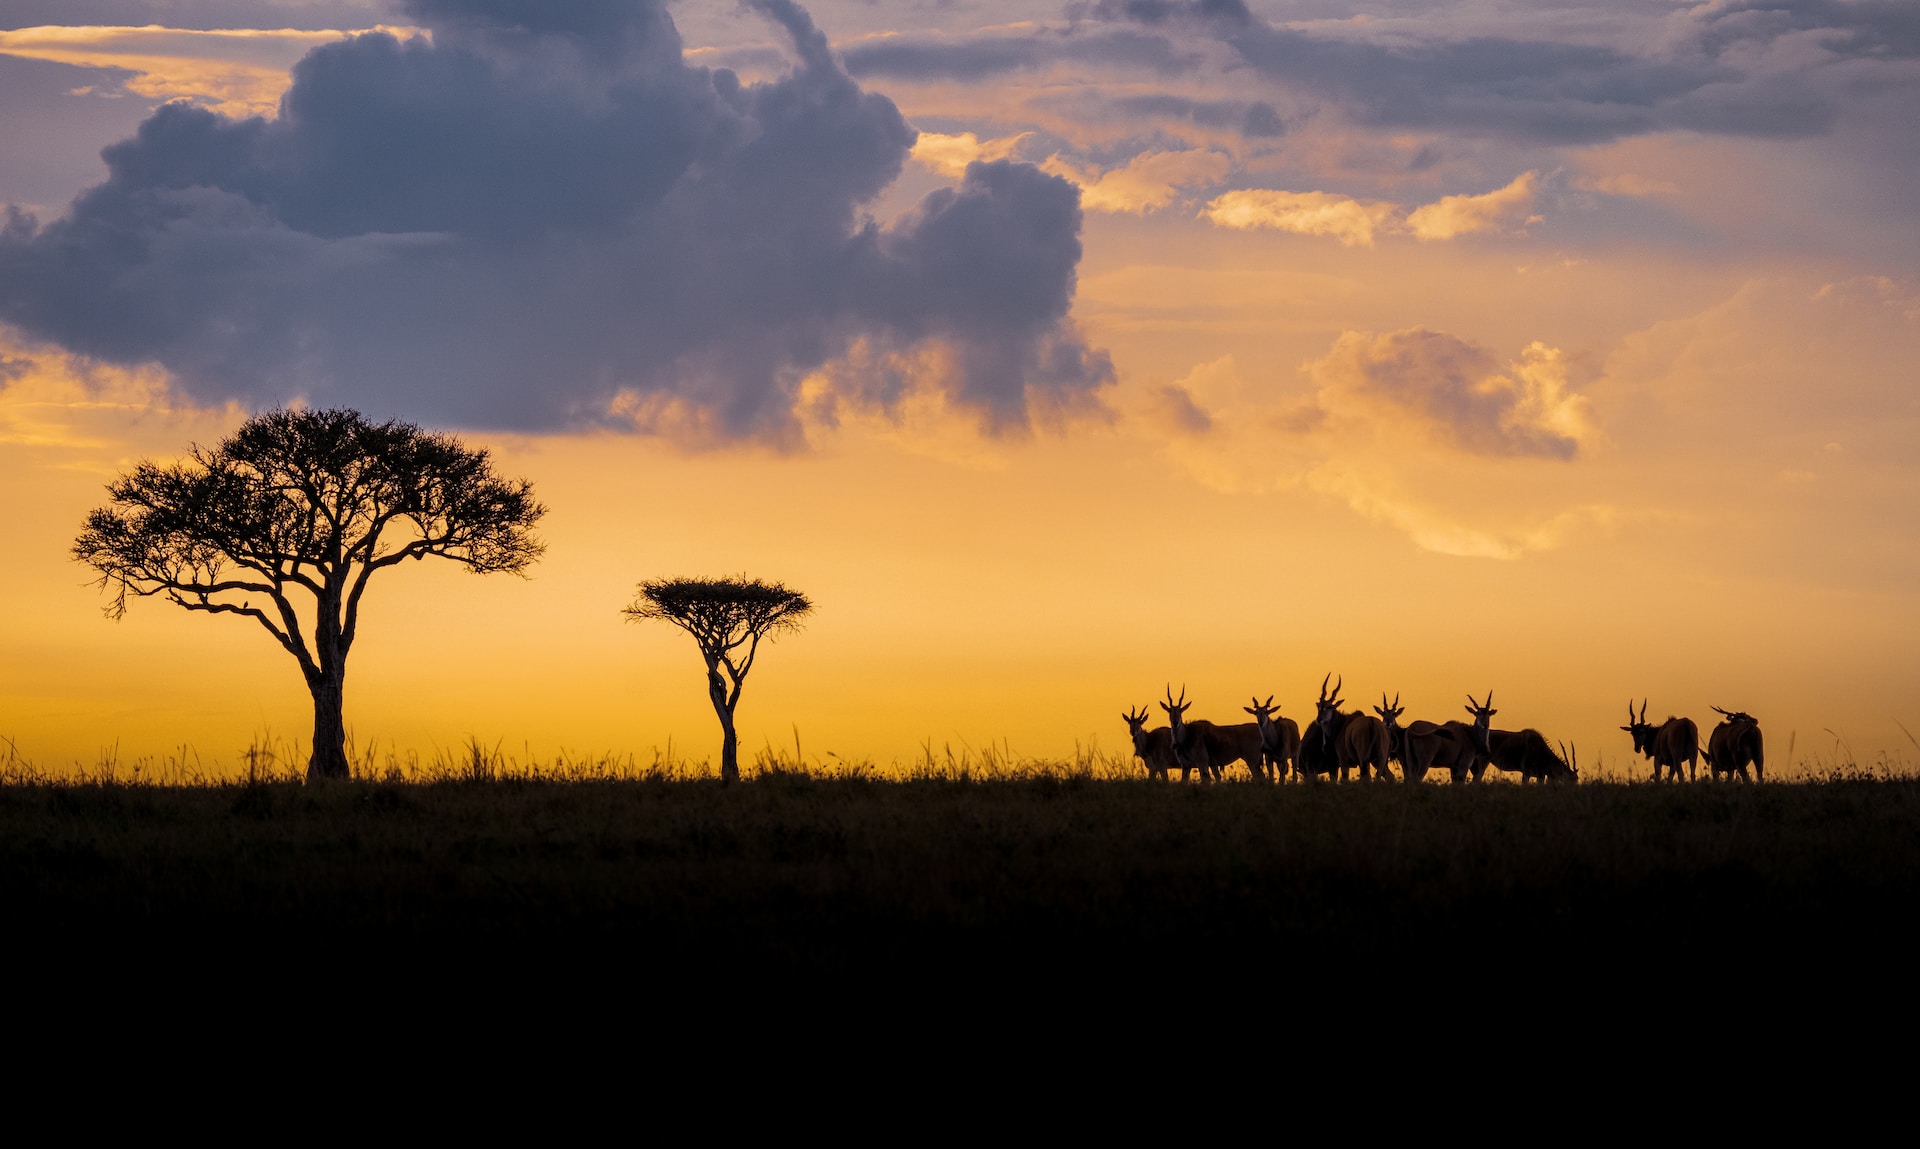 Photograph of safari animals in silhouette at sunset. Wildlife photography. 